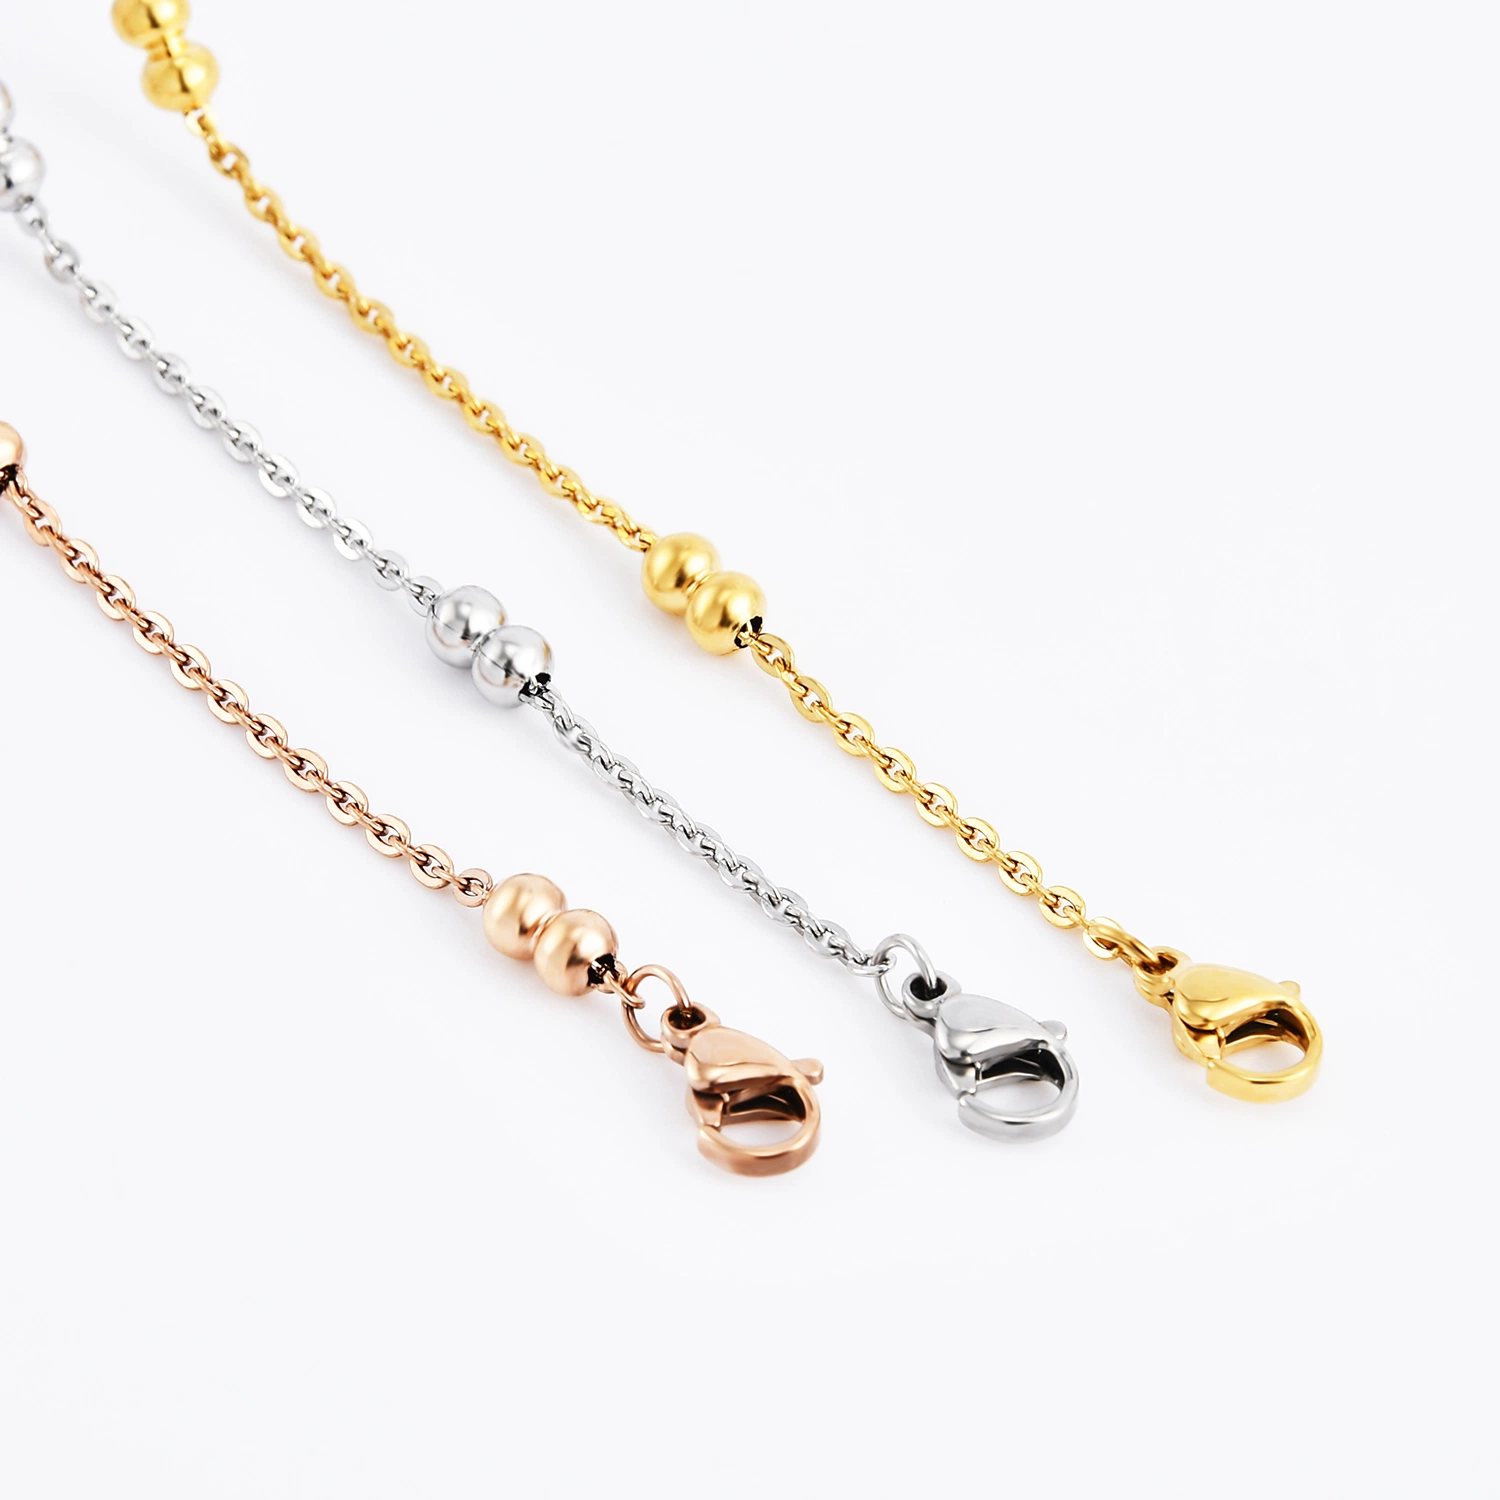 Imitation Gold Plated Rose Gold Stainless Steel Necklace Anklet Bracelet Making Chain Jewelry for Fashion Accessories